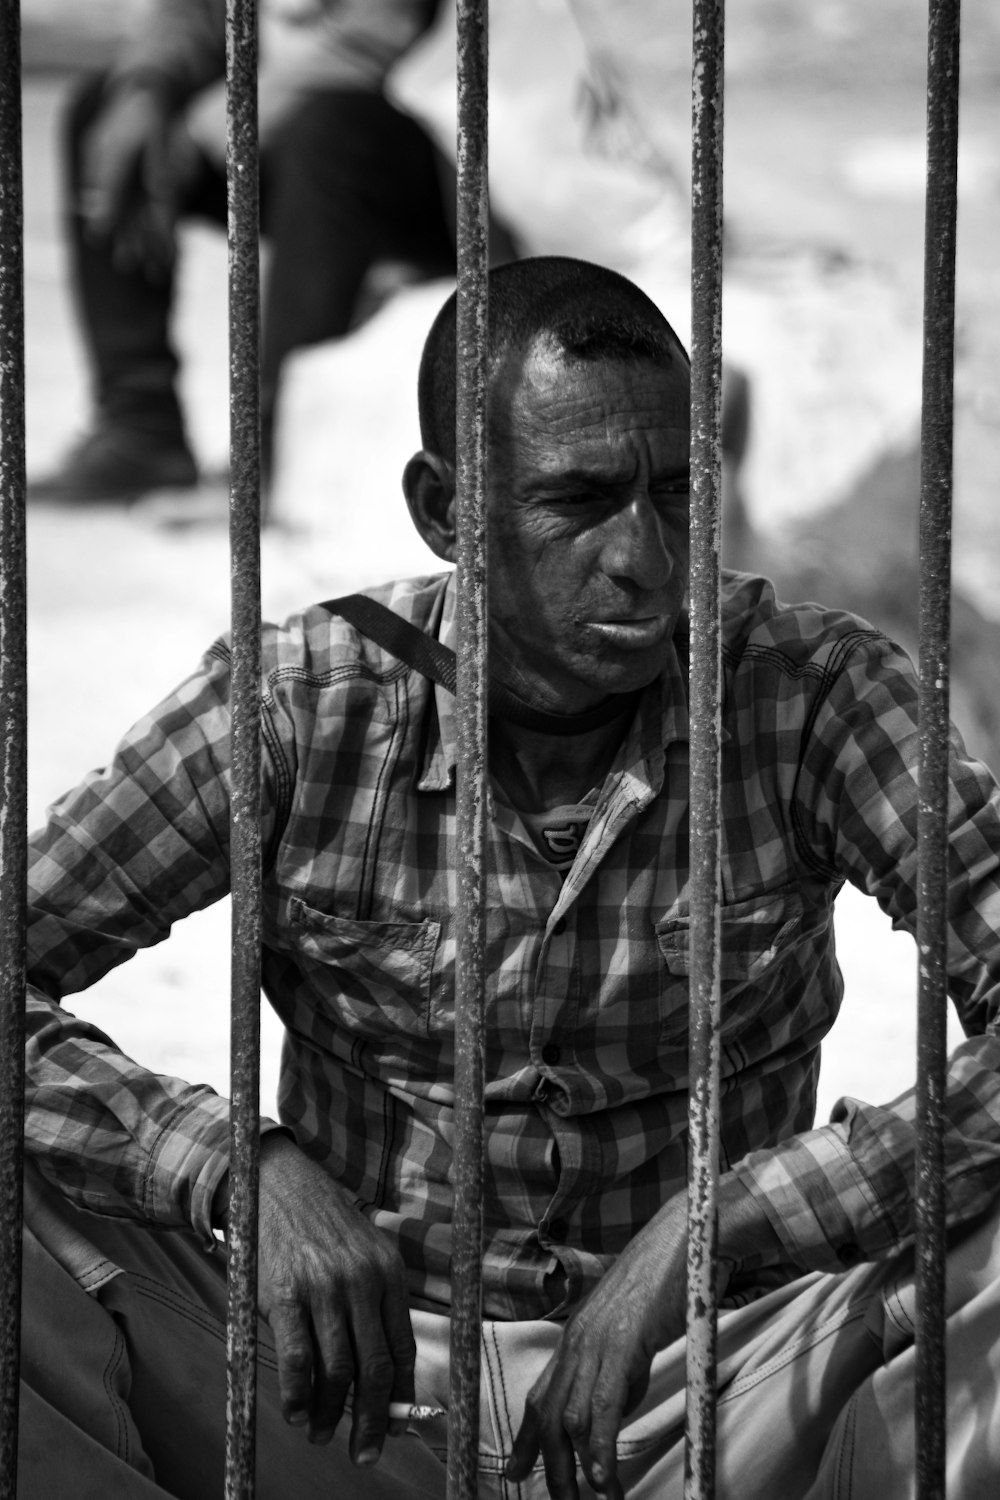 a man sitting behind bars in a jail cell